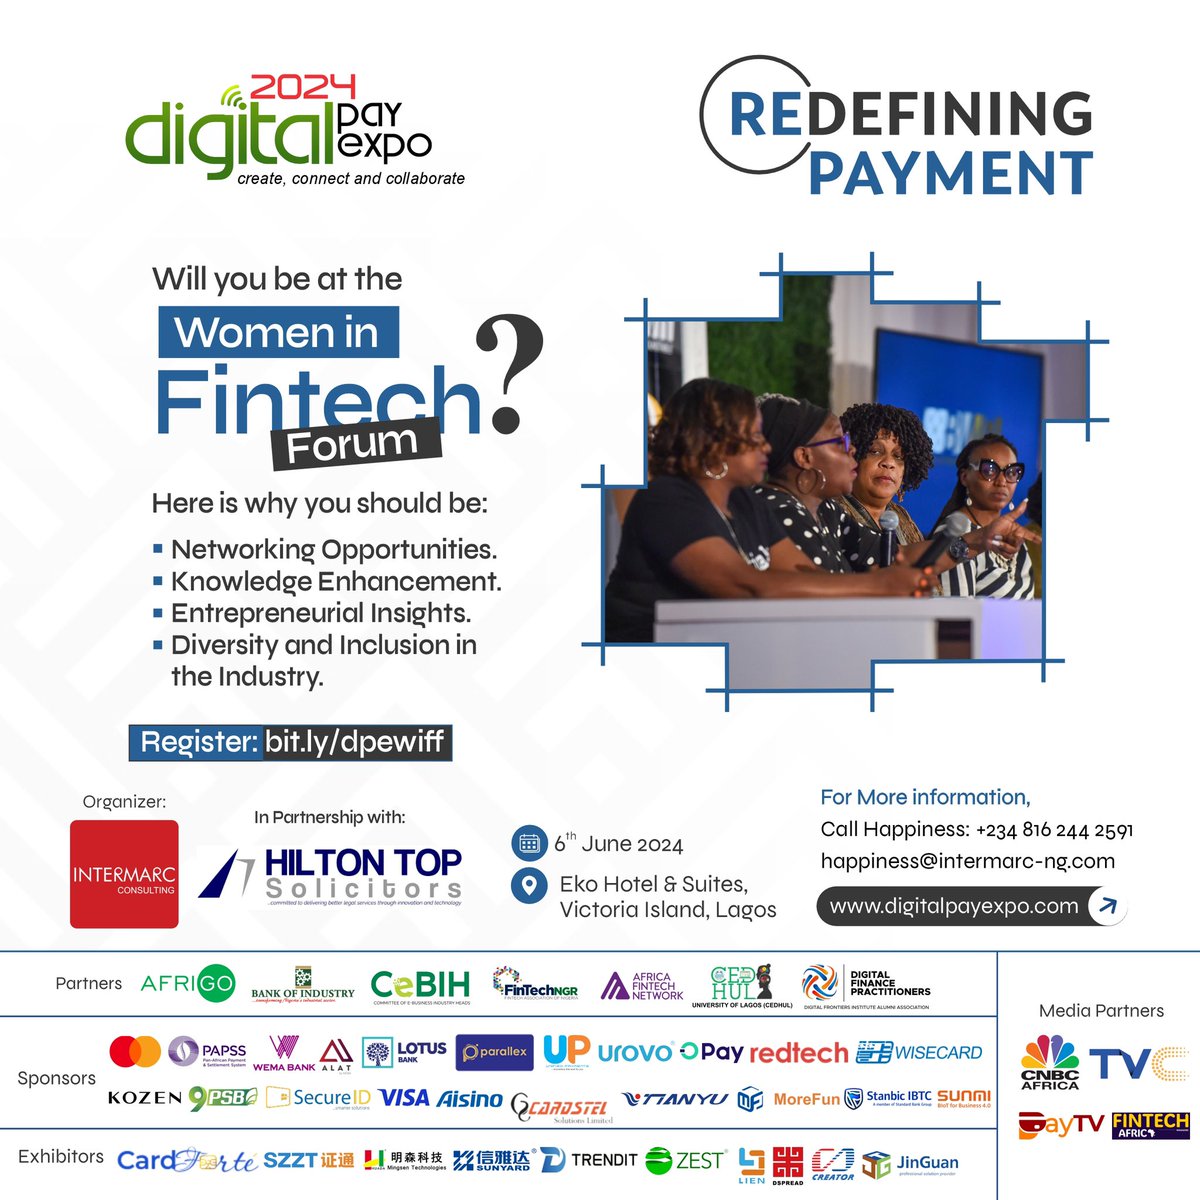 Get ready to be inspired by industry leaders and changemakers who are shaping the future of fintech!
This forum is scheduled to take place on June 6 at the Eko Hotel and Suites. Click on this link to register: bit.ly/dpewiff